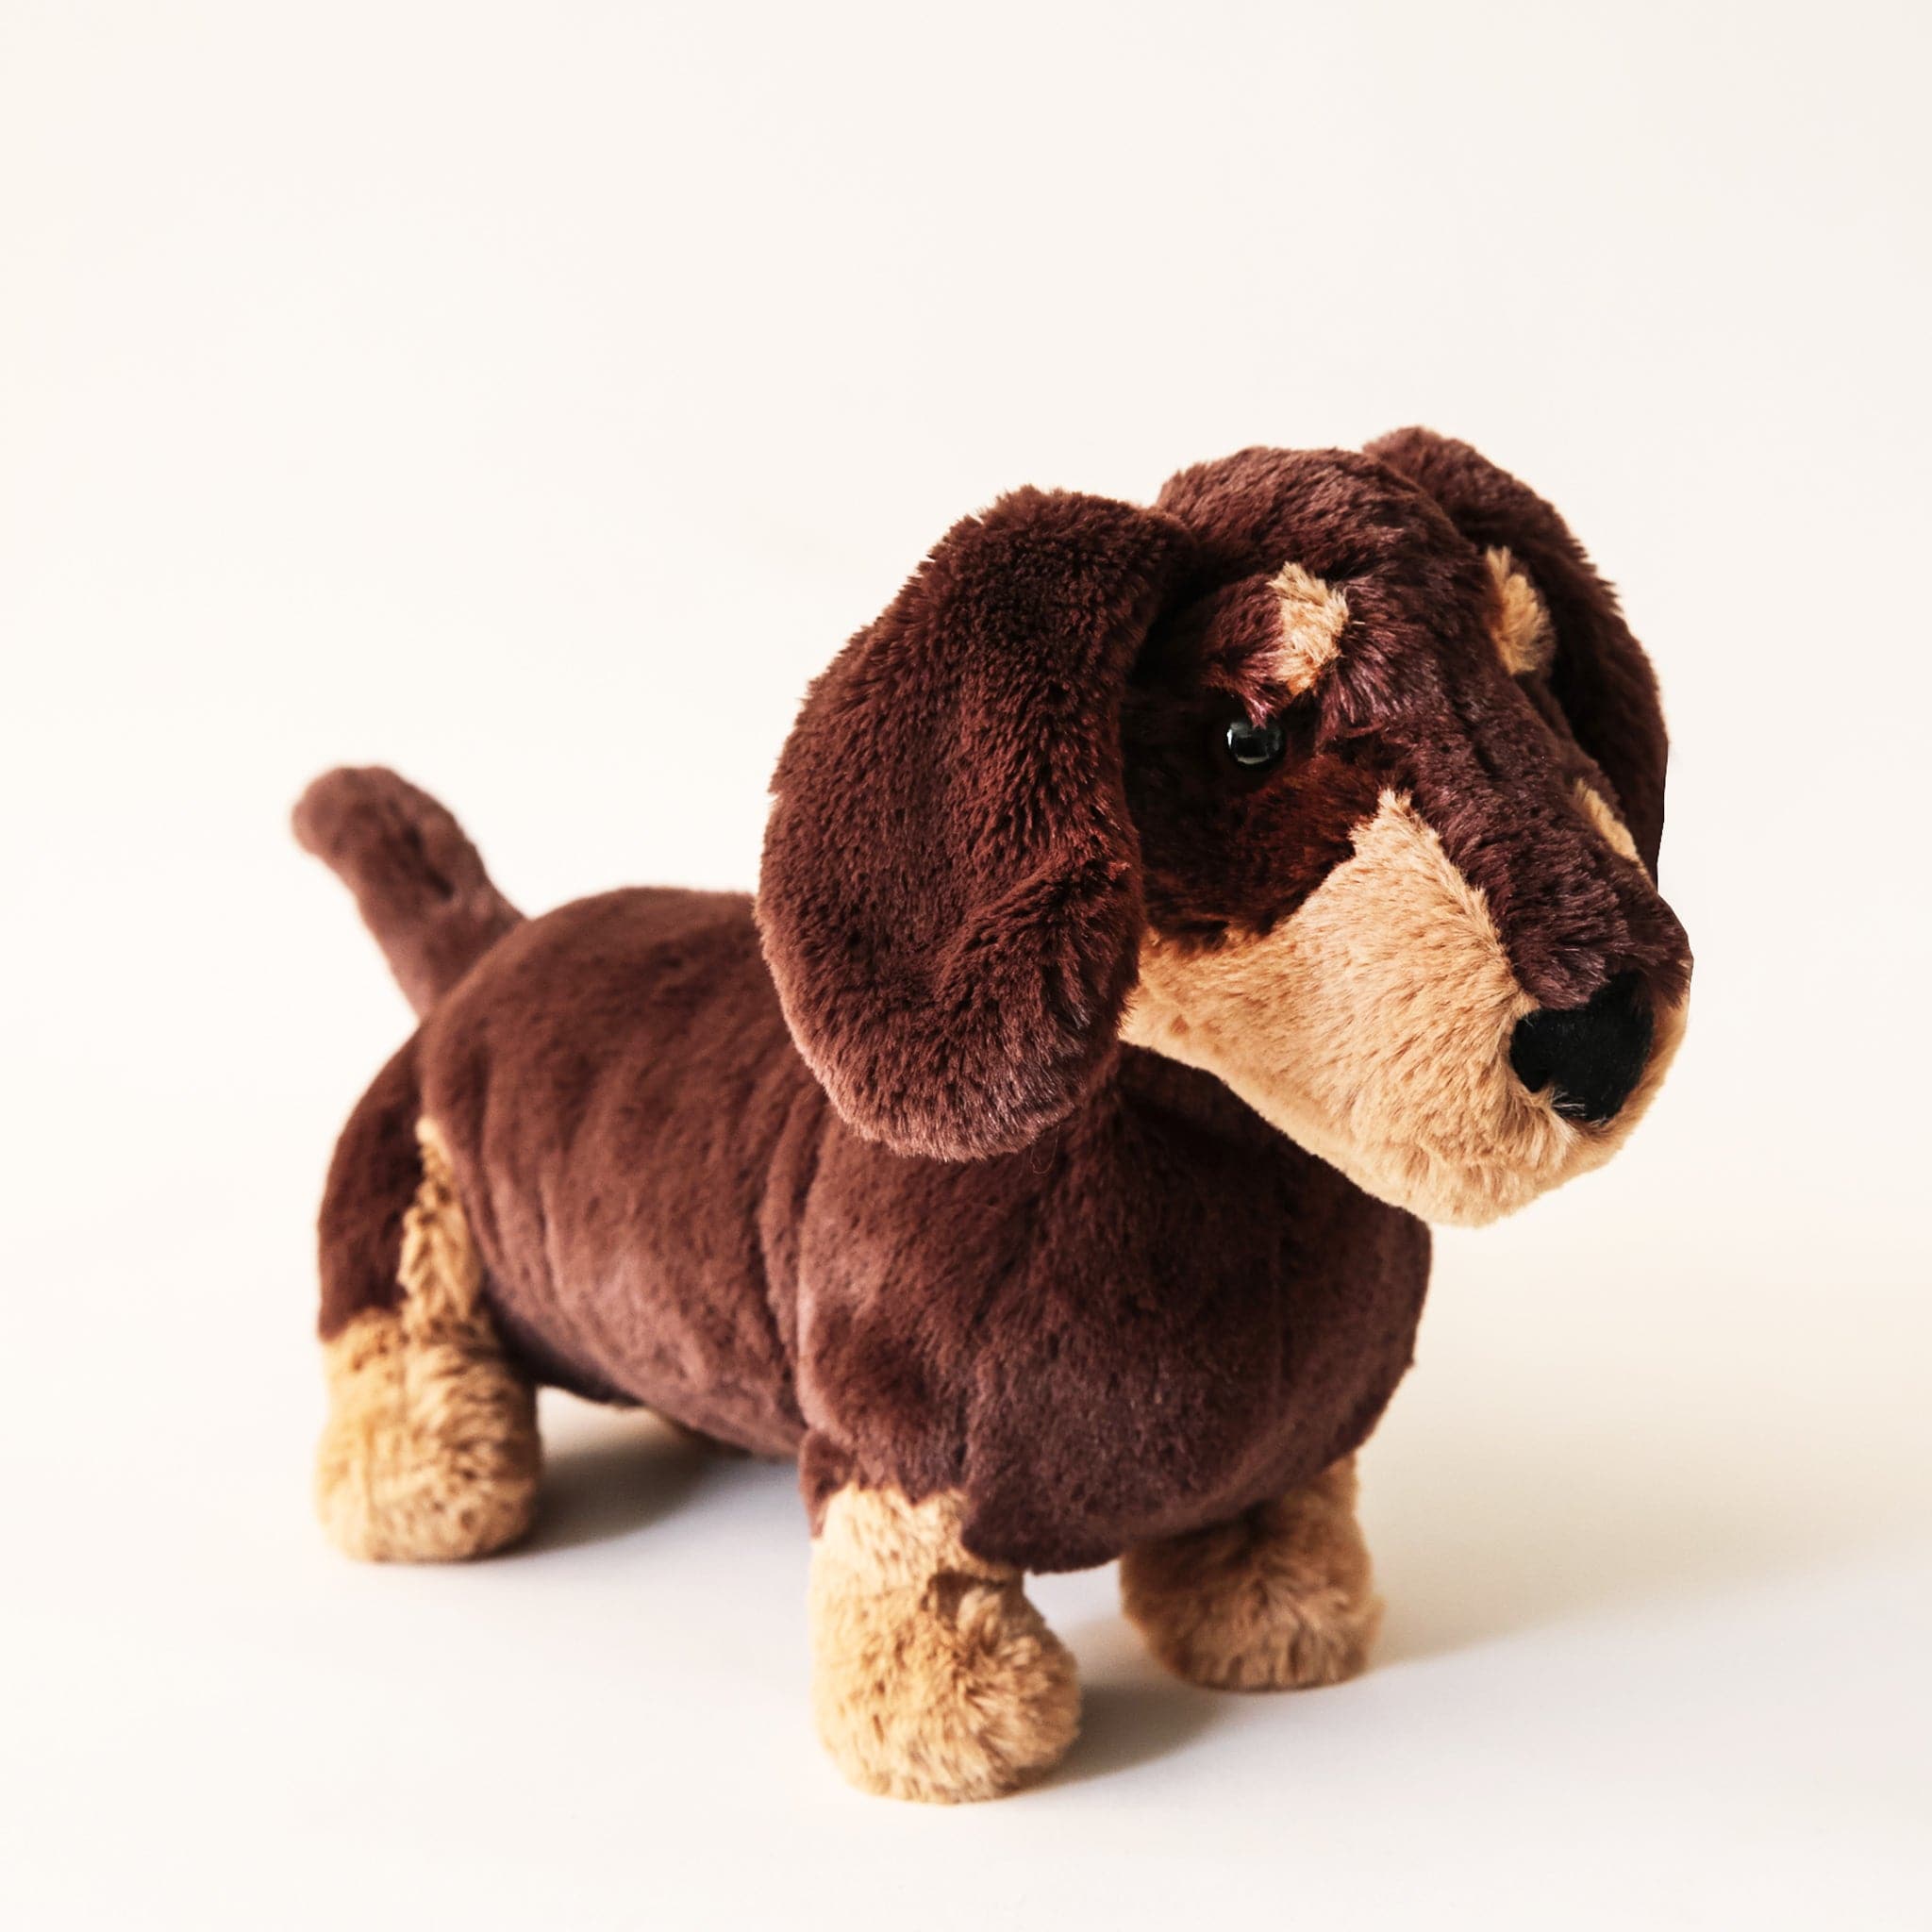 Soft stuffed animal in the shape of a dark chocolate colored dachshund Weiner dog with caramel colored spots.